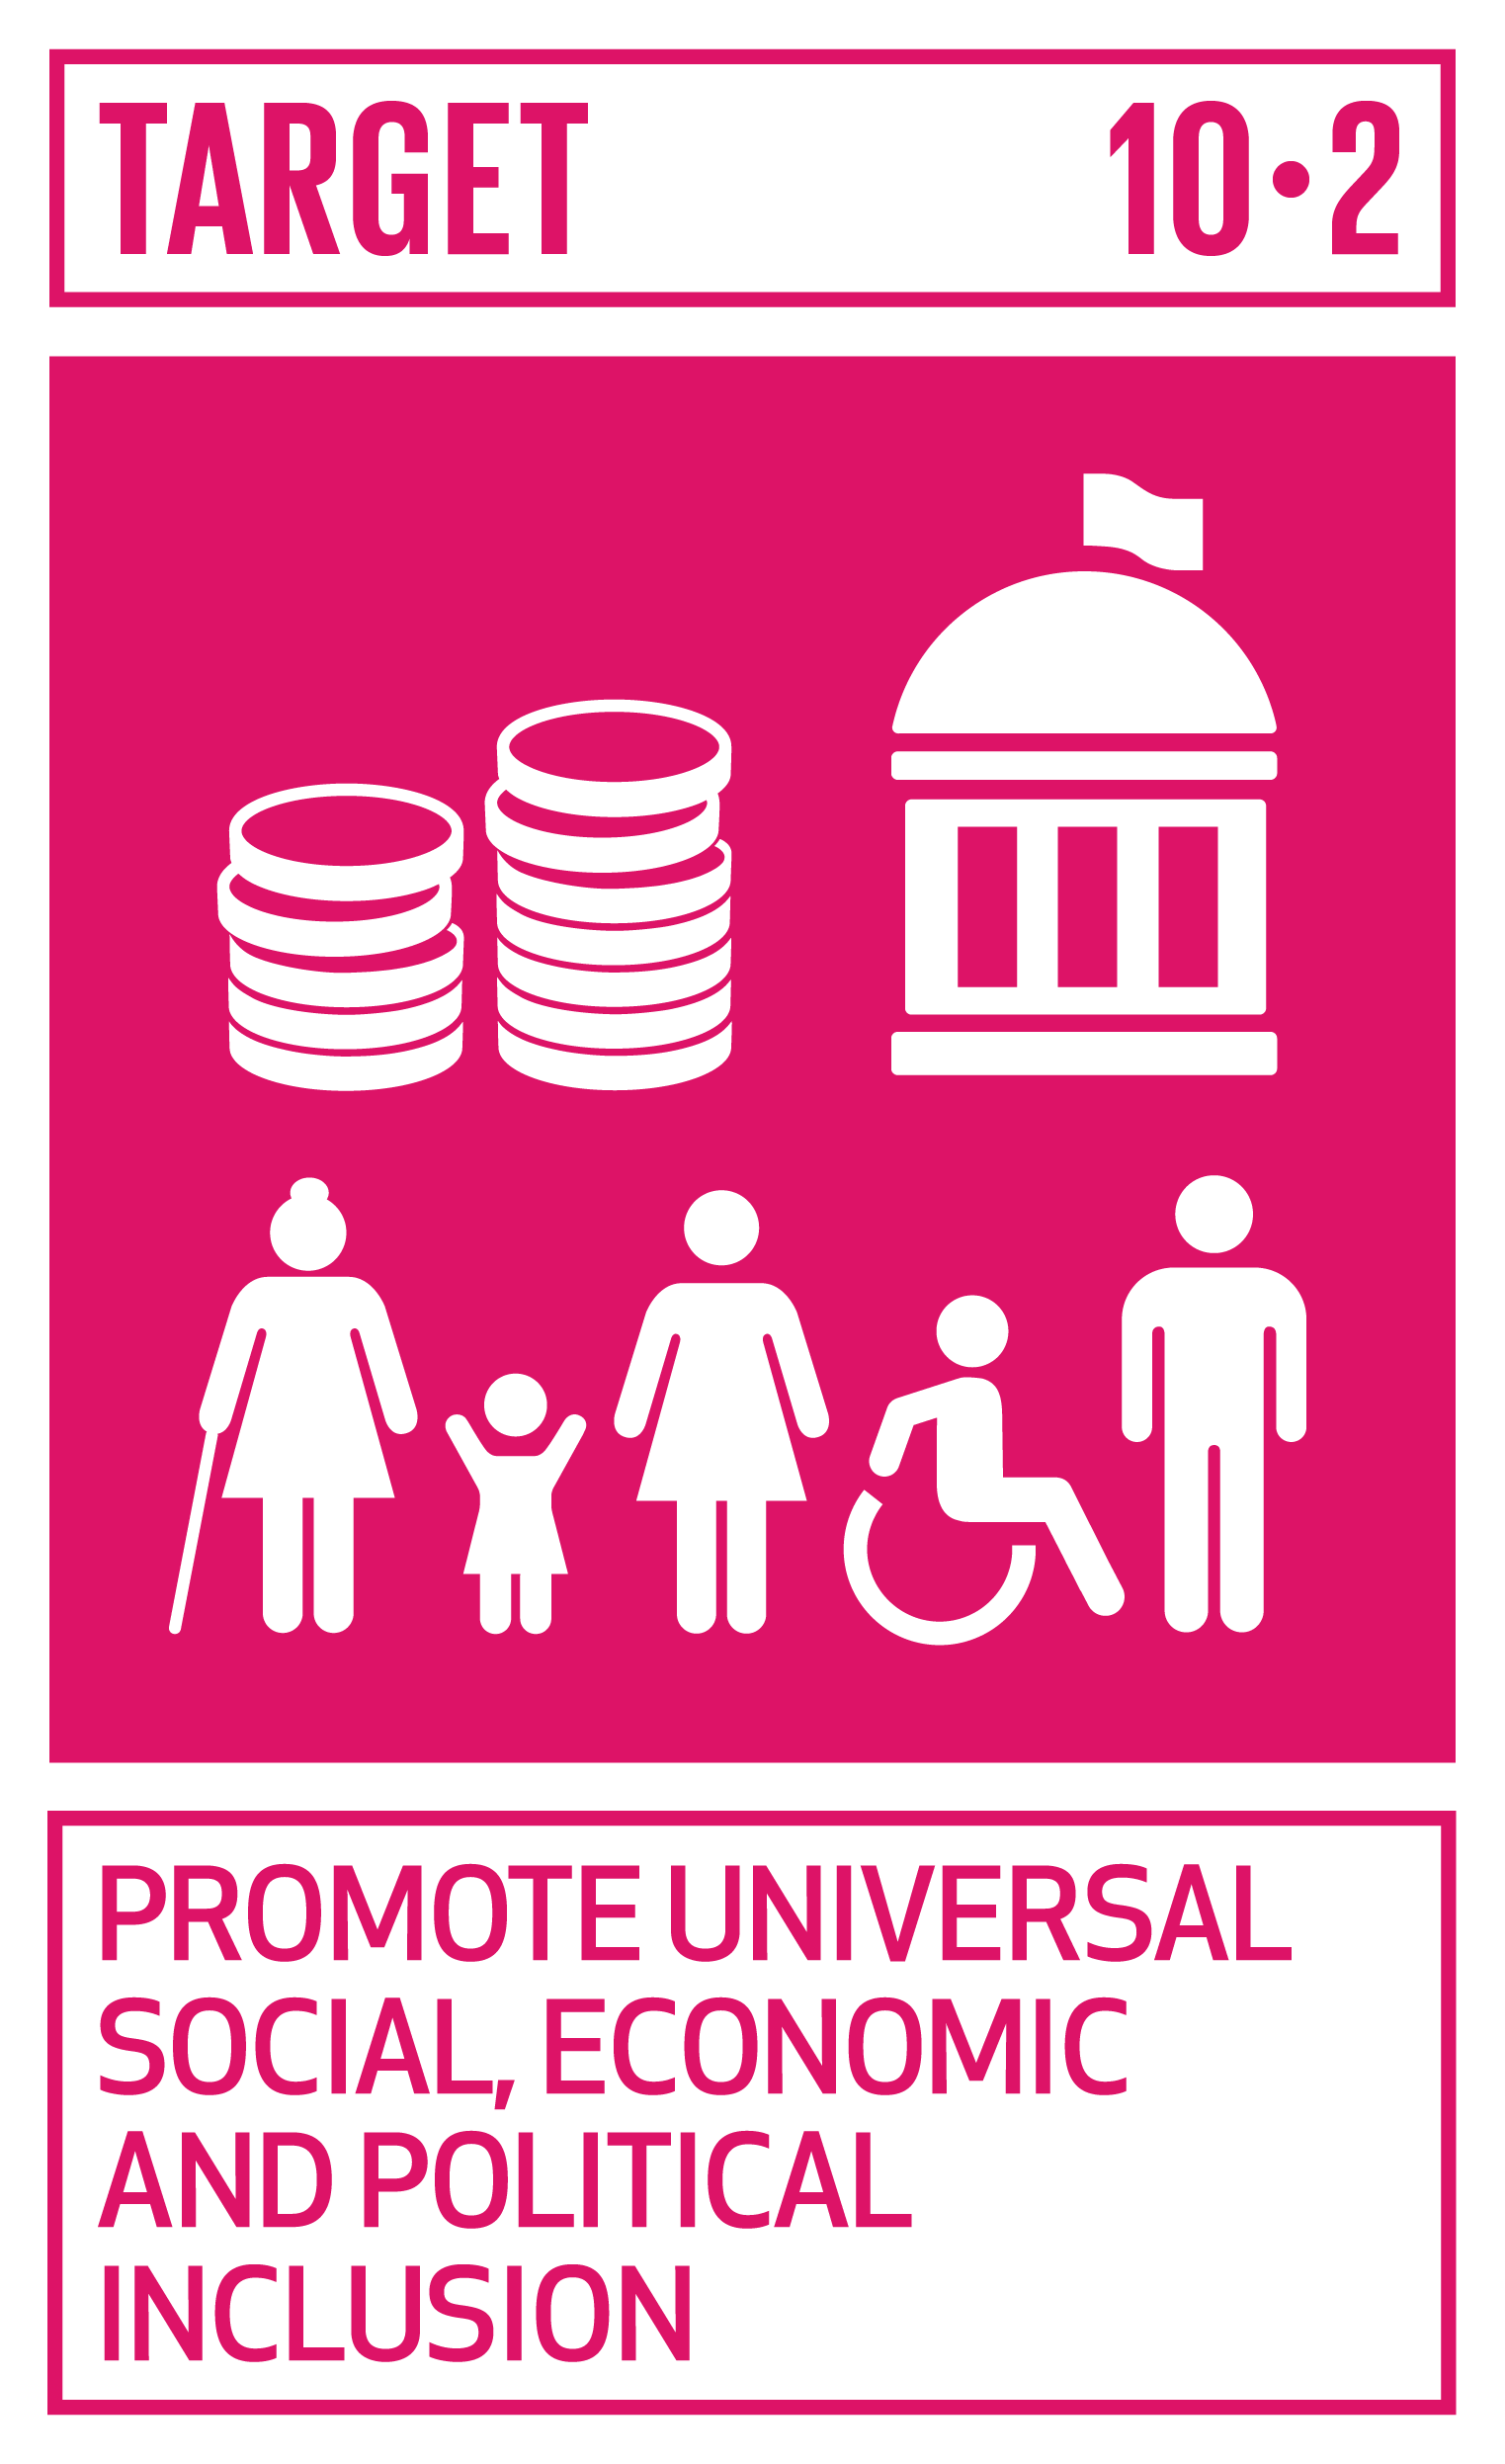 https://ocm.iccrom.org/sdgs/sdg-10-reduced-inequalities/sdg-102-promote-universal-social-economic-and-political-inclusion